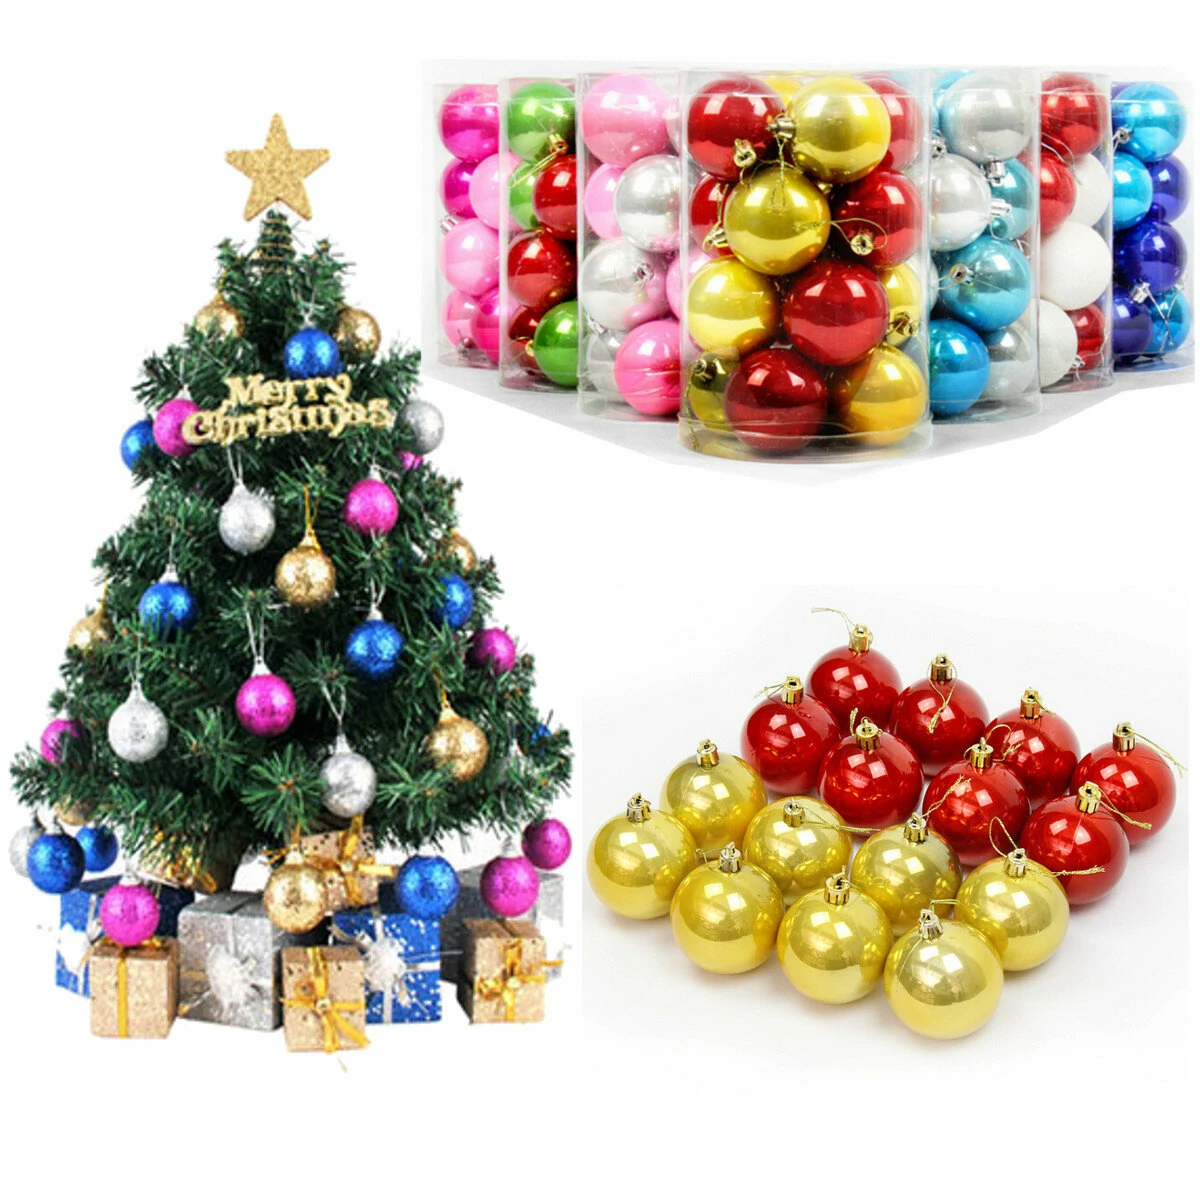 16pc 6/4cm christmas trees xmas hanging balls bauble party decorations ornaments